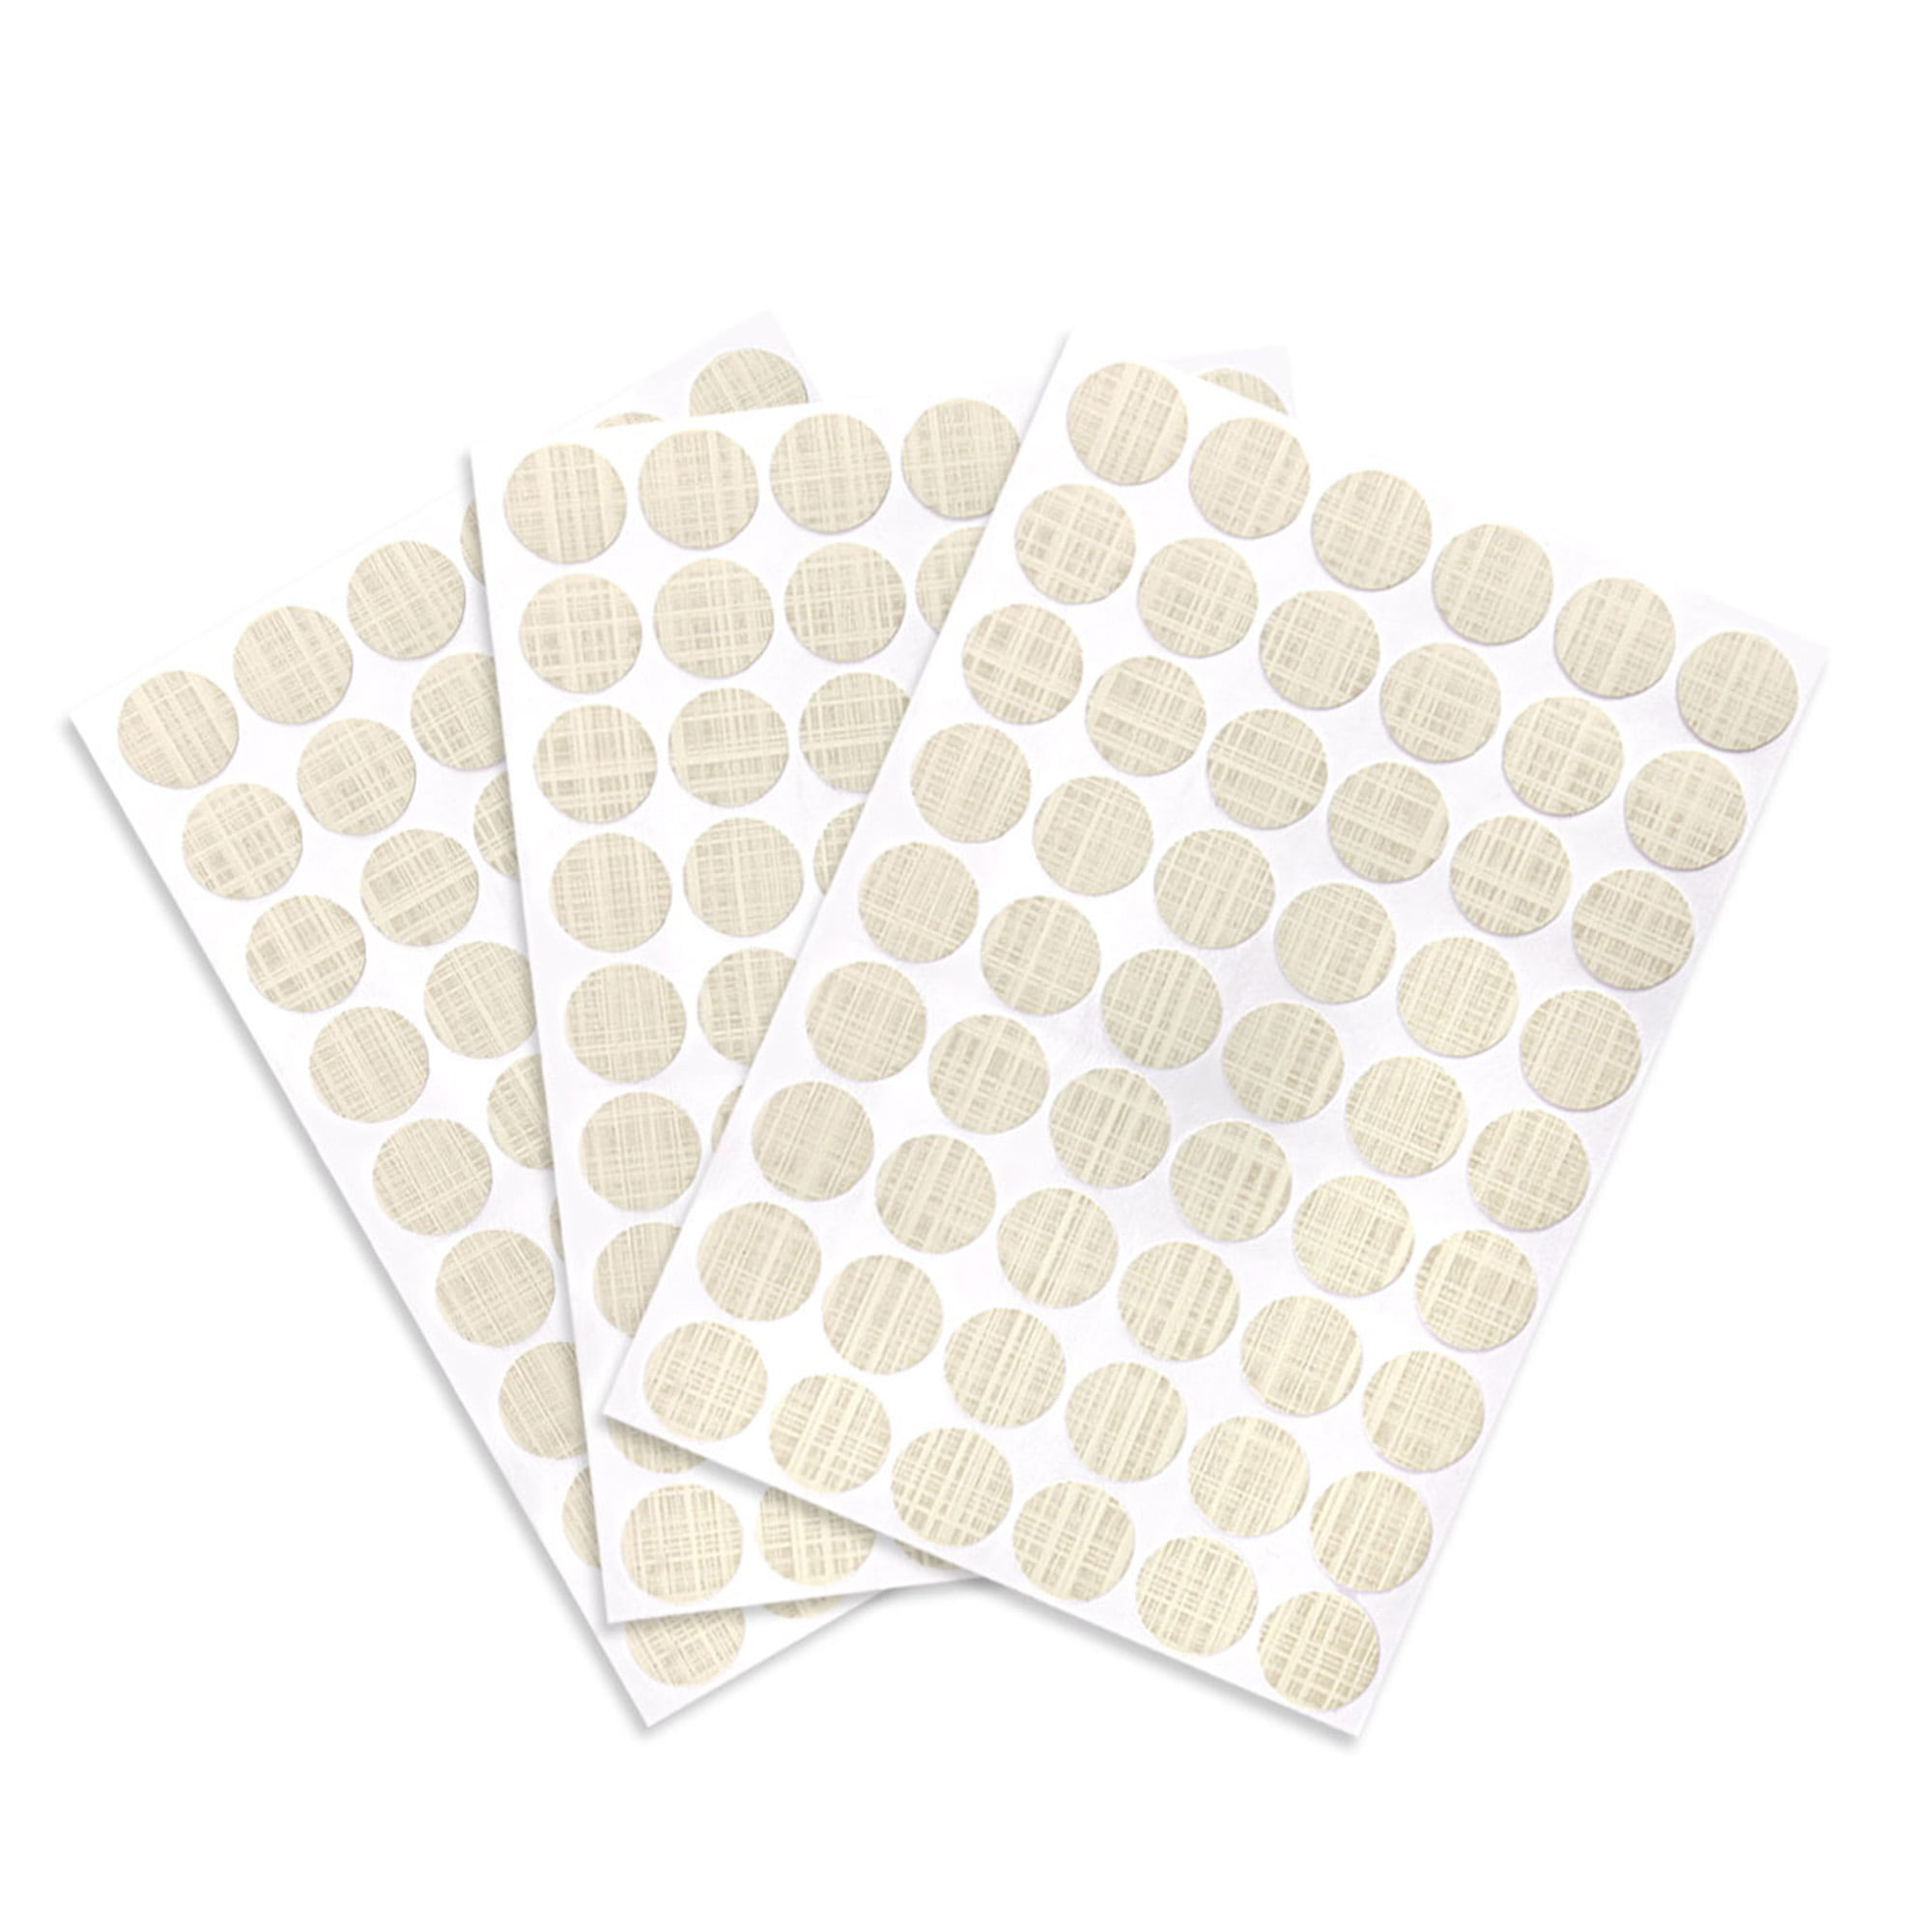 3 Tables Caps Dust Label 21 mm 54 in 1 Light Oak Self-Adhesive Labels with Screw Hole Self-Adhesive Screw caps